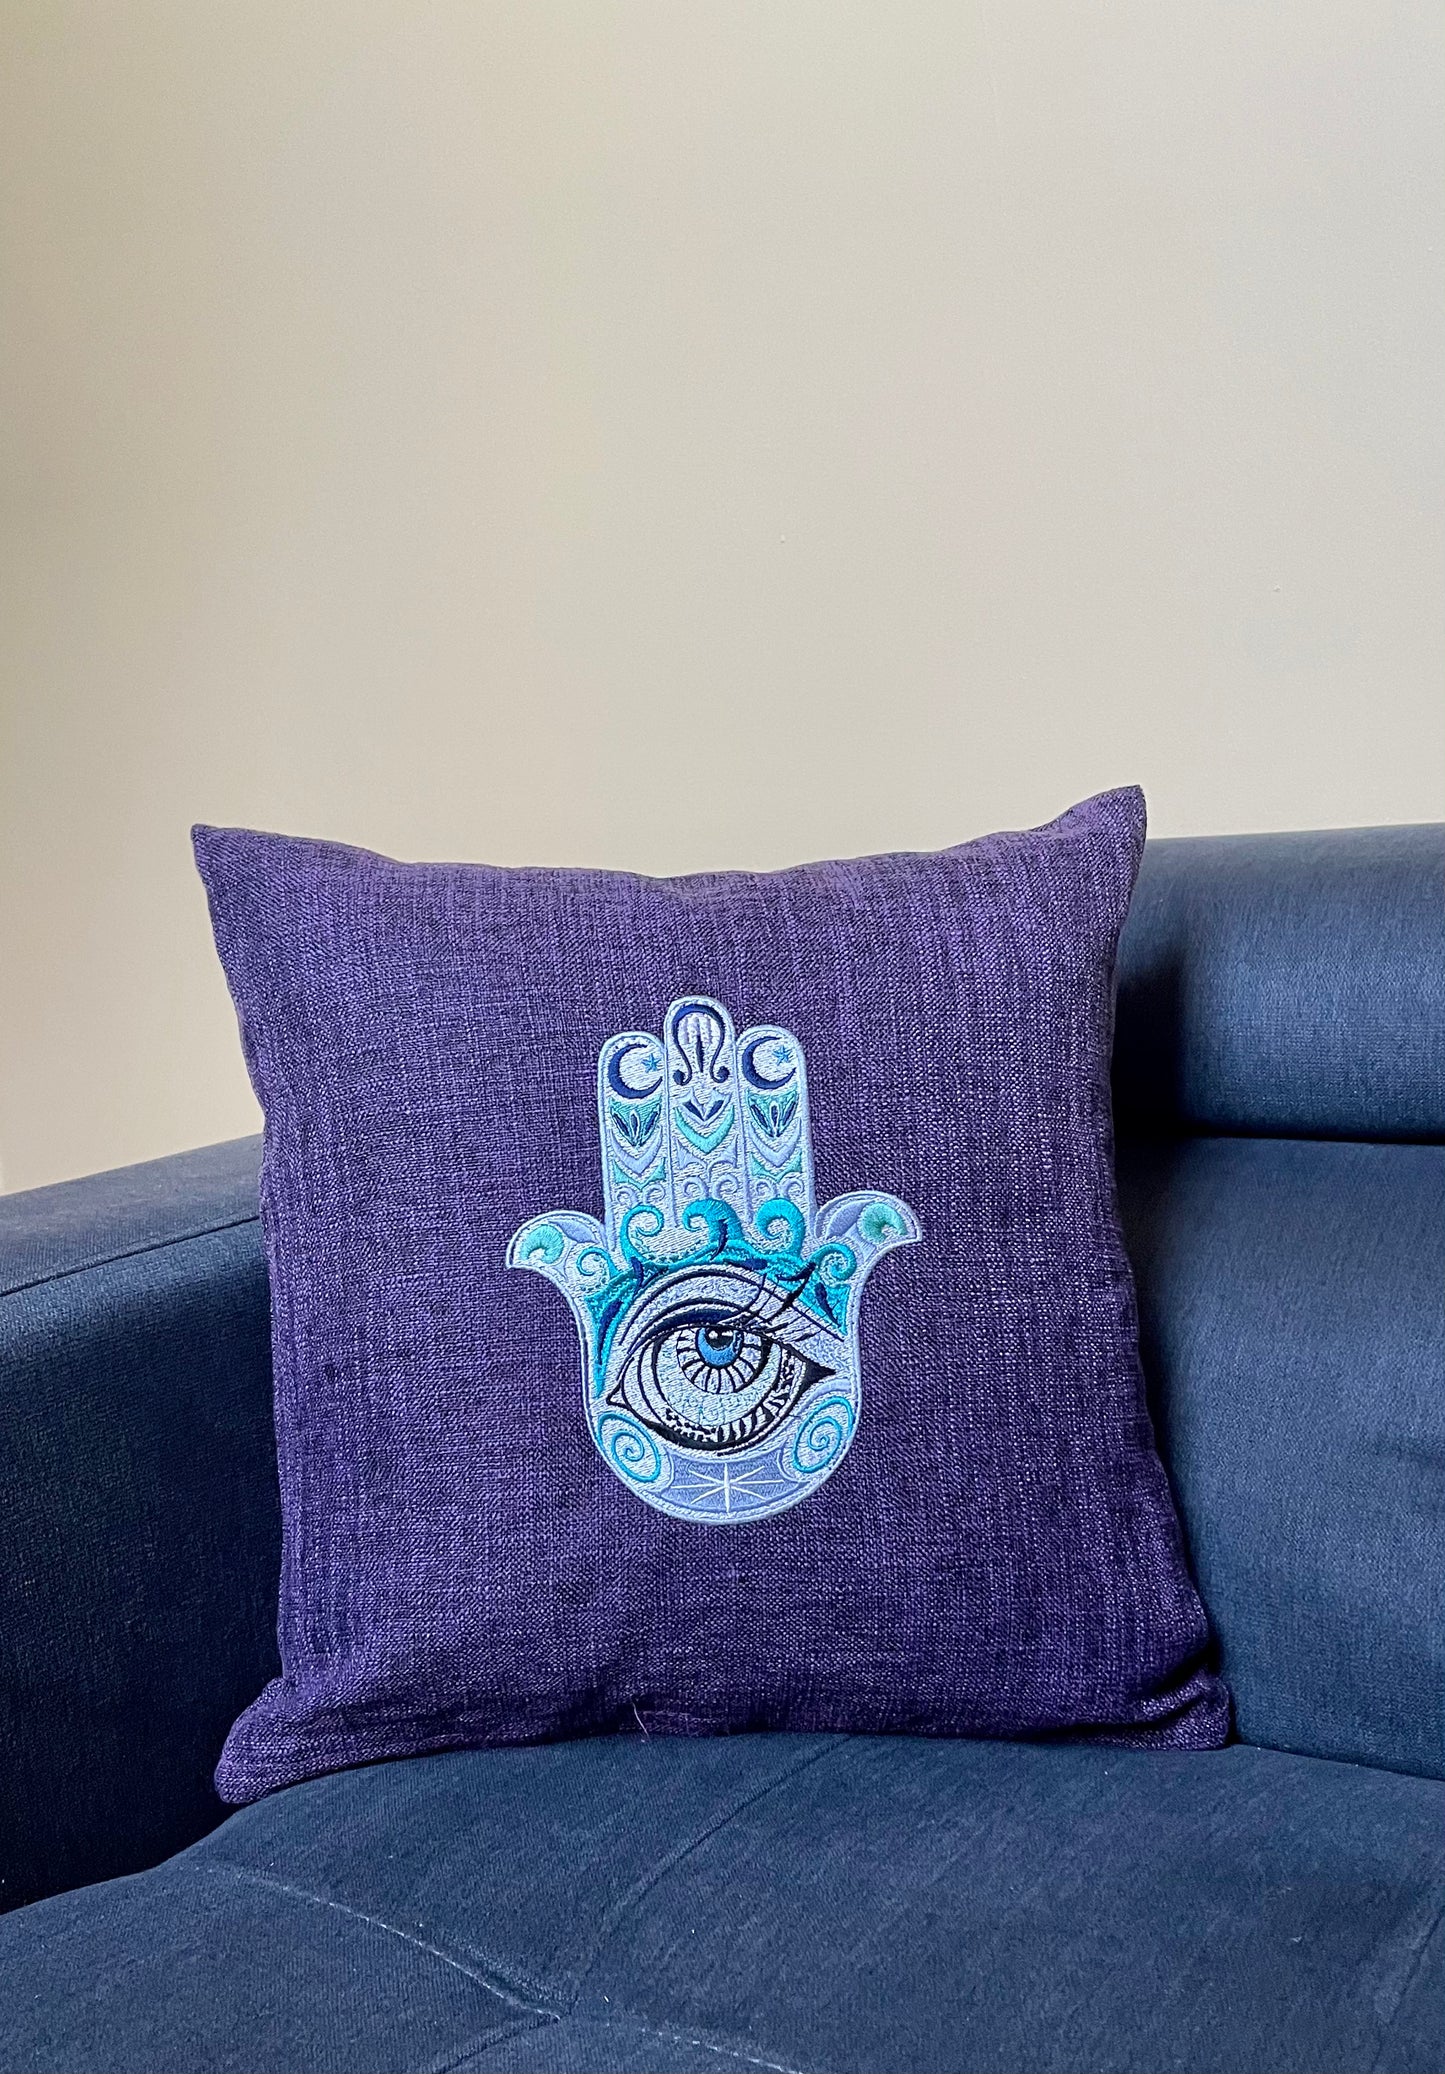 Hamsa with Eye Throw Pillow Cover 16" x 16" Cotton. Embroidered Decorative pillow Cover